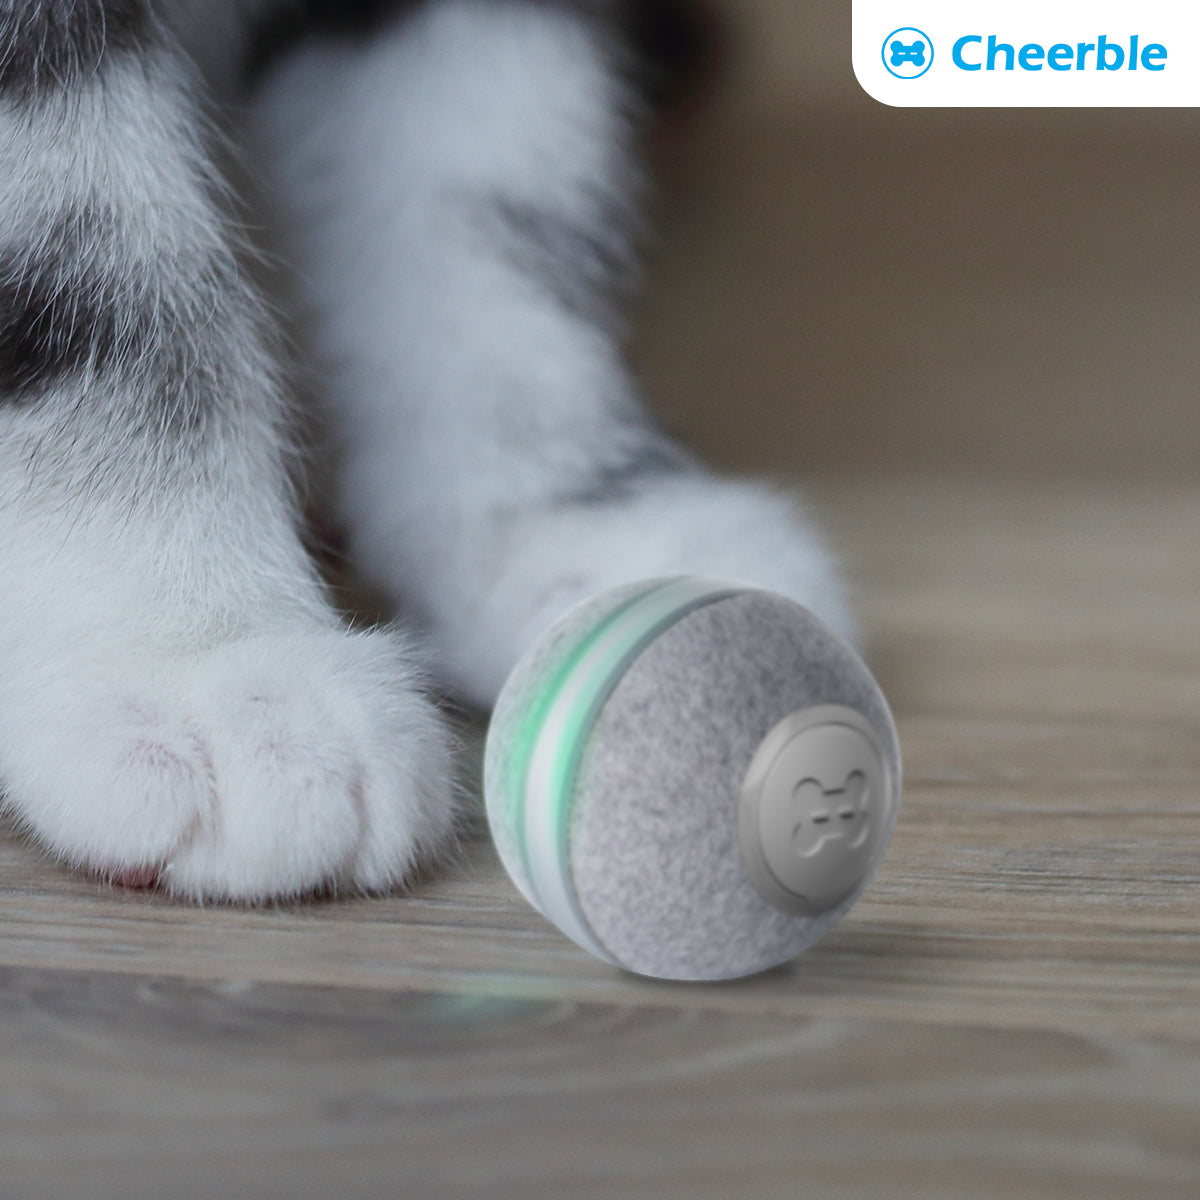 CHEERBLE Automatic Smart Interactive Cat Ball Toy – savvypetz